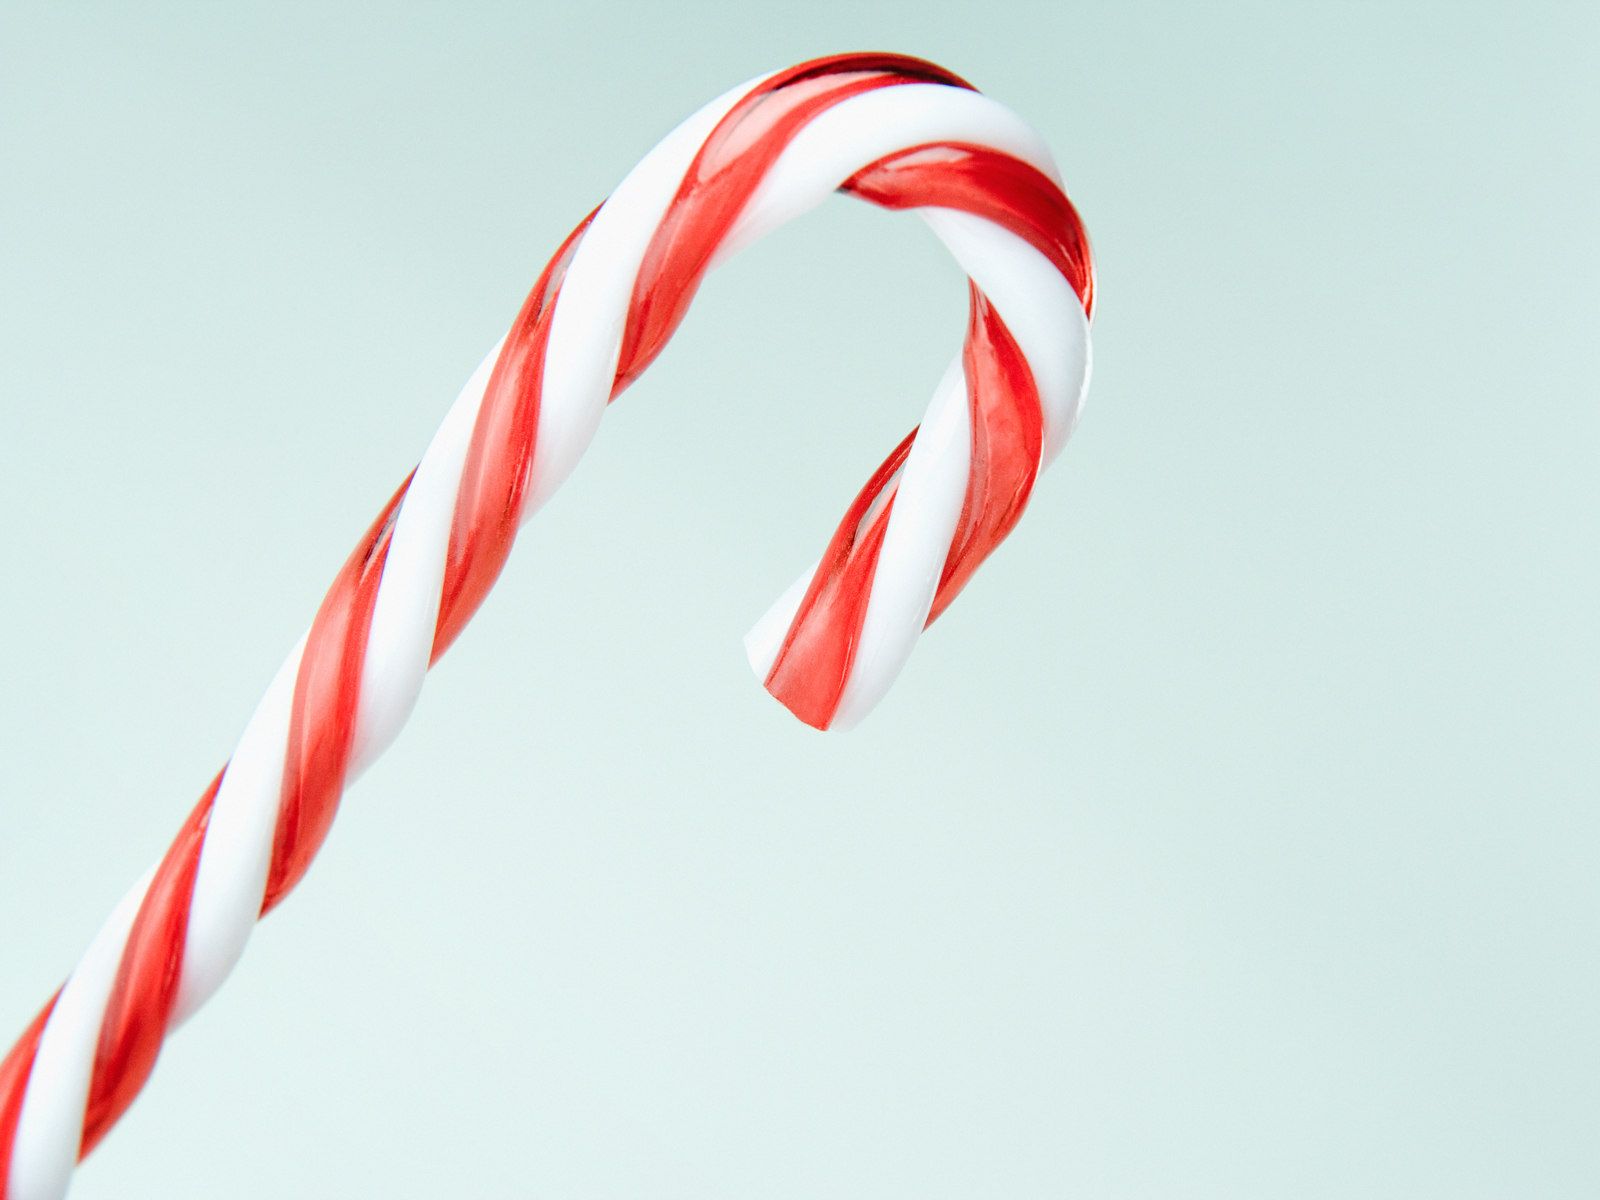 2621 Candy Cane Wallpaper Stock Photos HighRes Pictures and Images   Getty Images